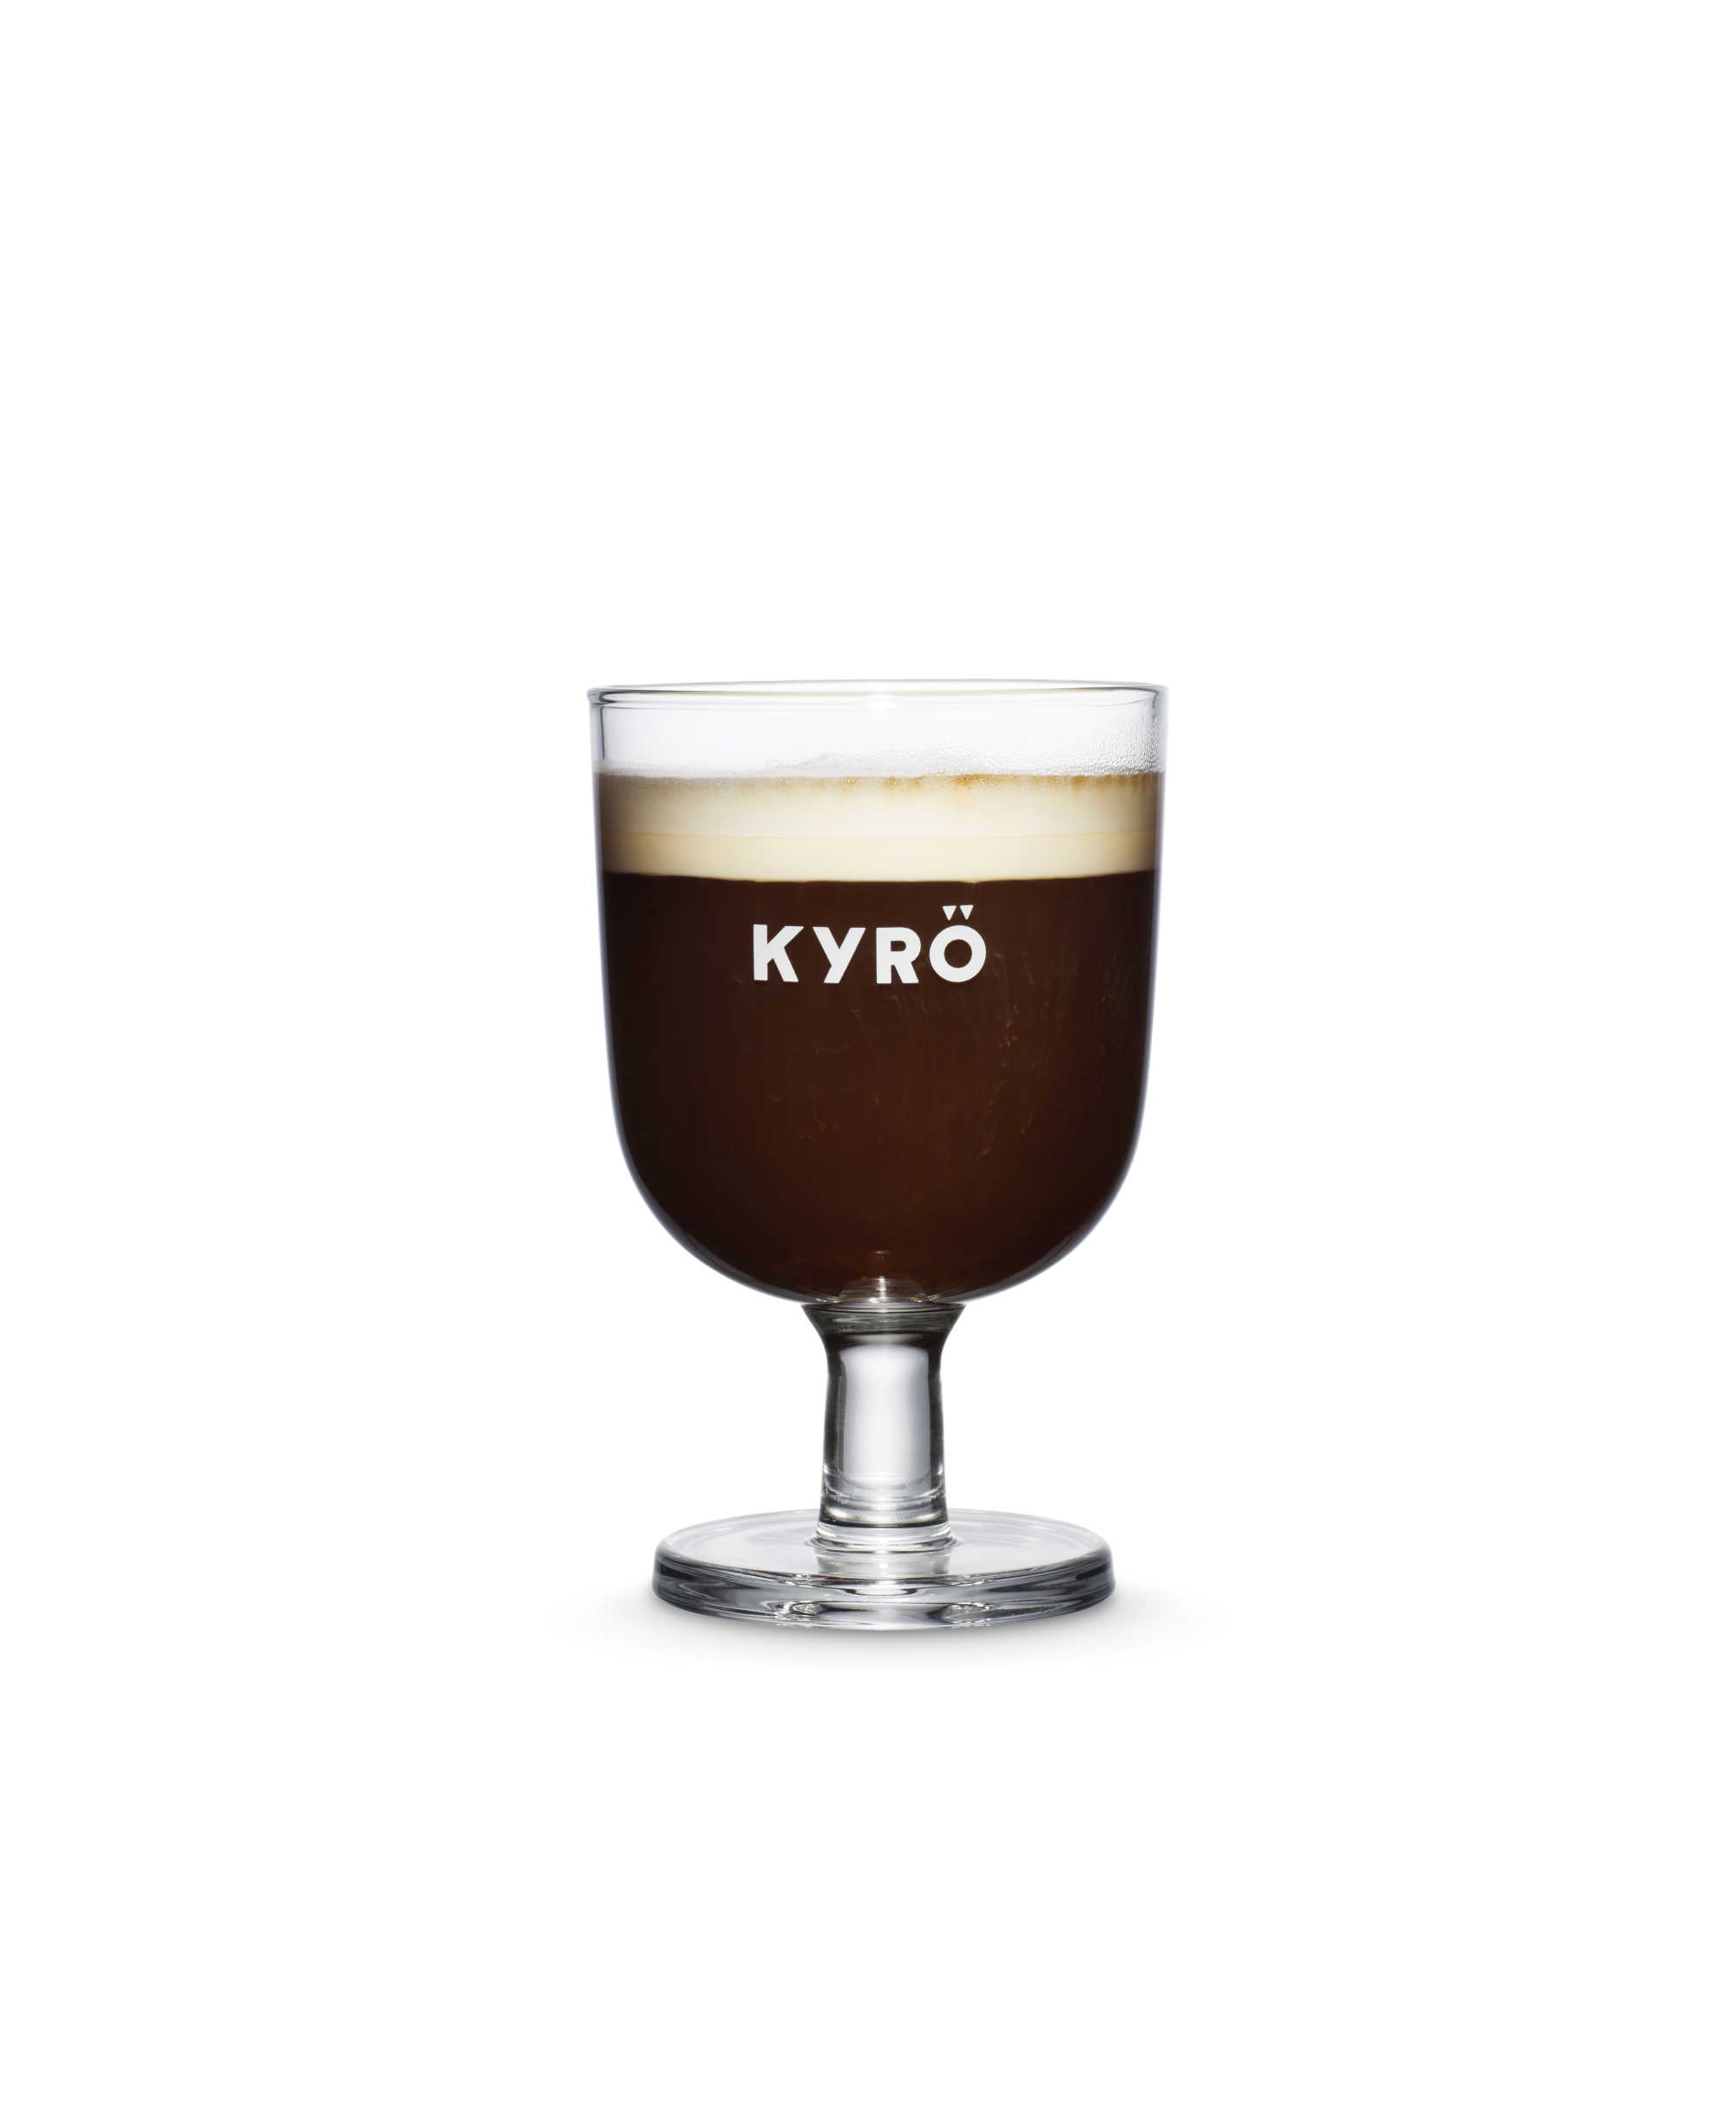 Finnish version of classic Irish Coffee is made using Finnish rye whisky. Cream float is easy to do using a spoon.